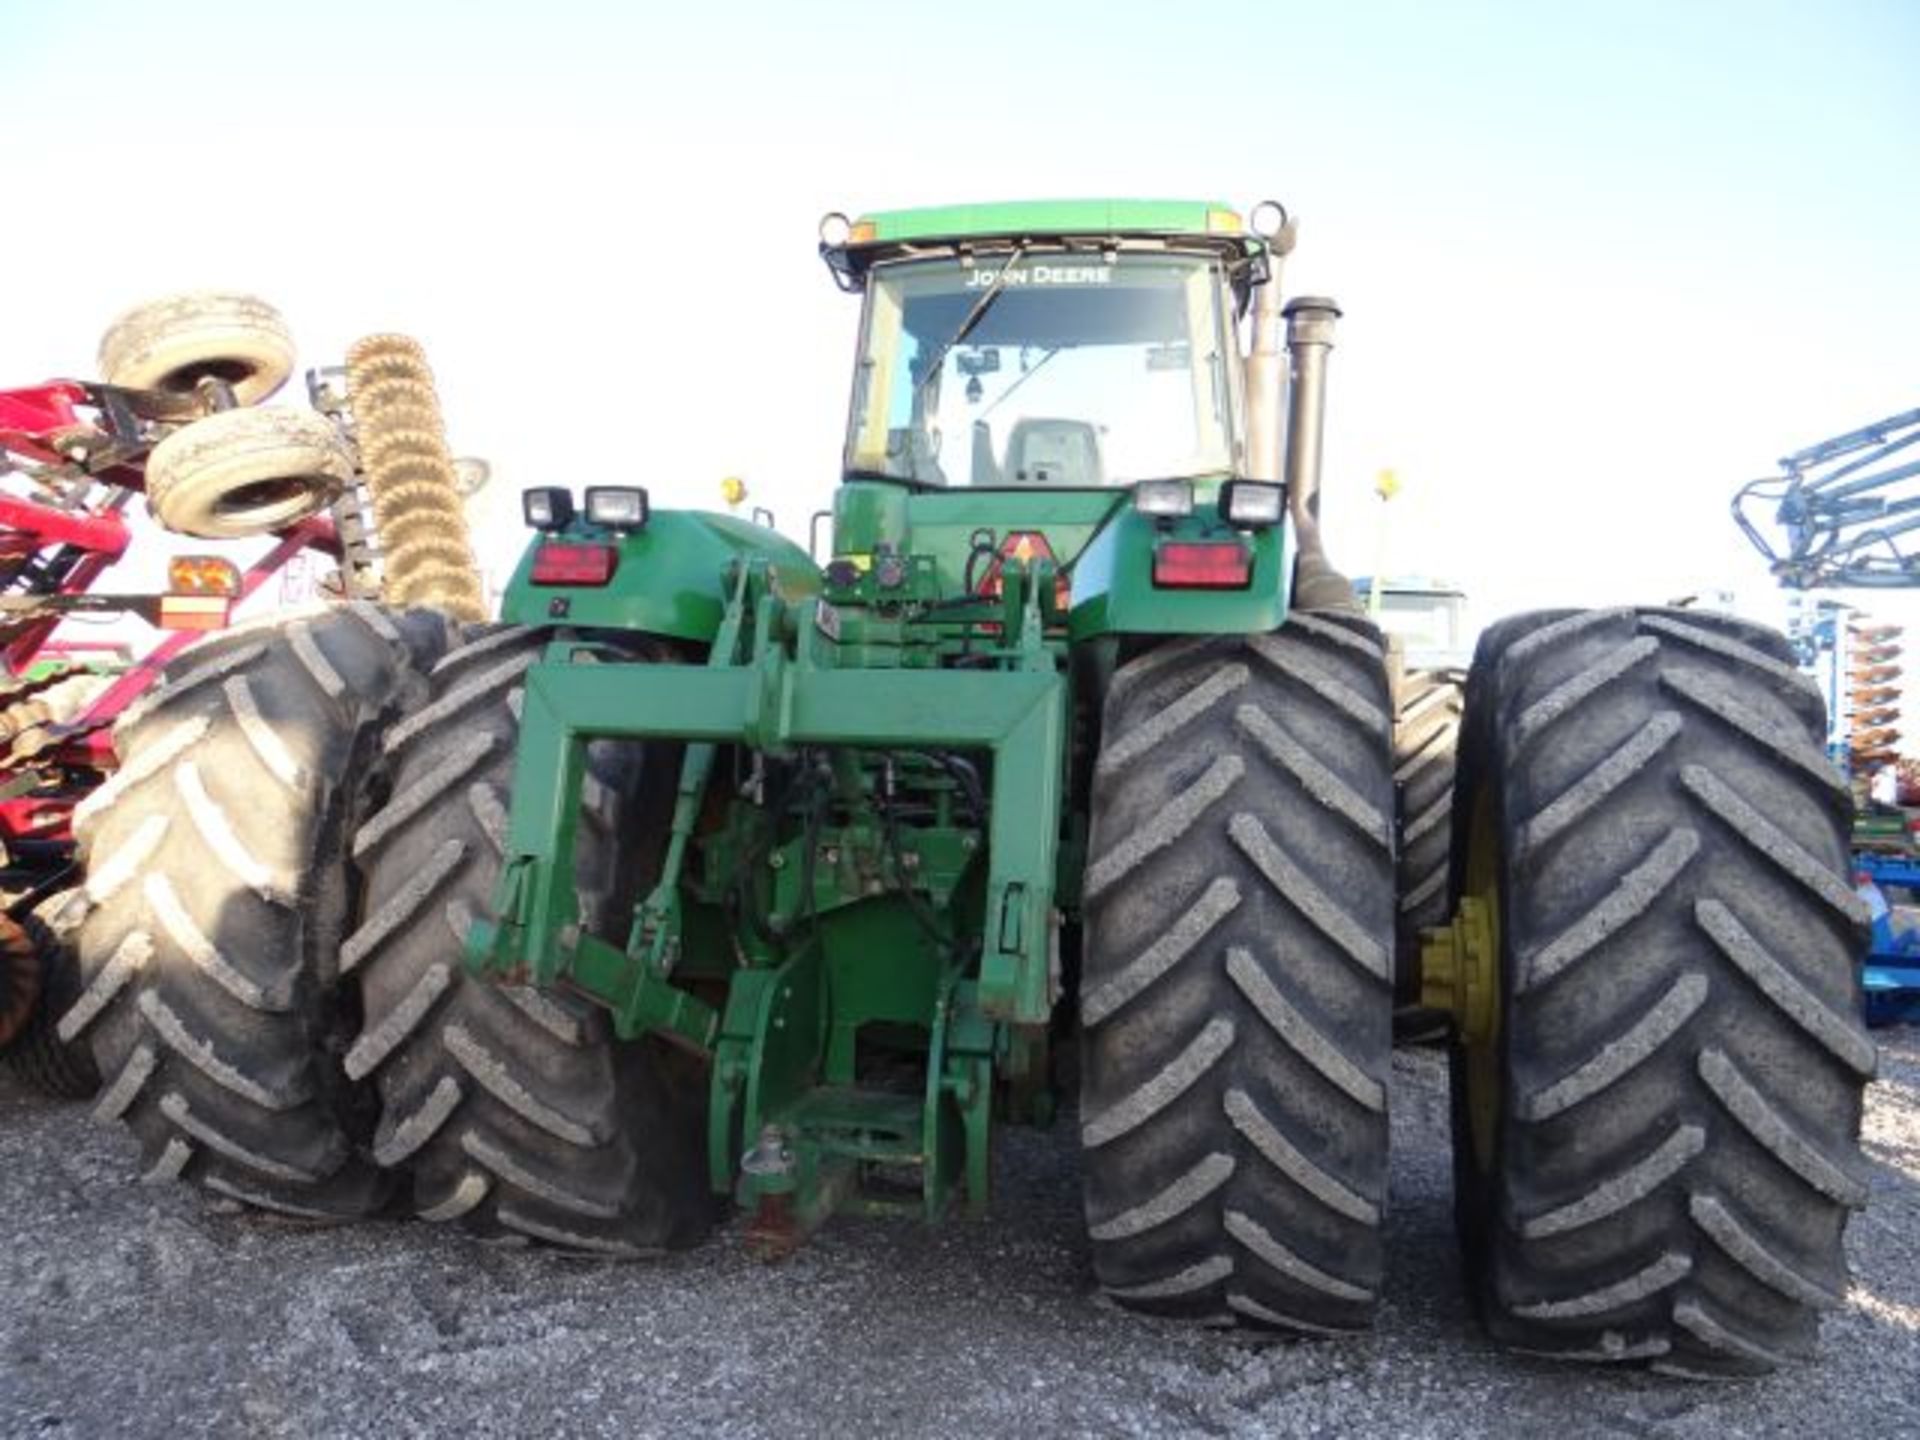 JD 9400 Tractor, 1998 w/ Duals, 6356 hrs, 3 SCV, 3pt Hitch, Powershift Trans, Differential Lock - Image 4 of 5